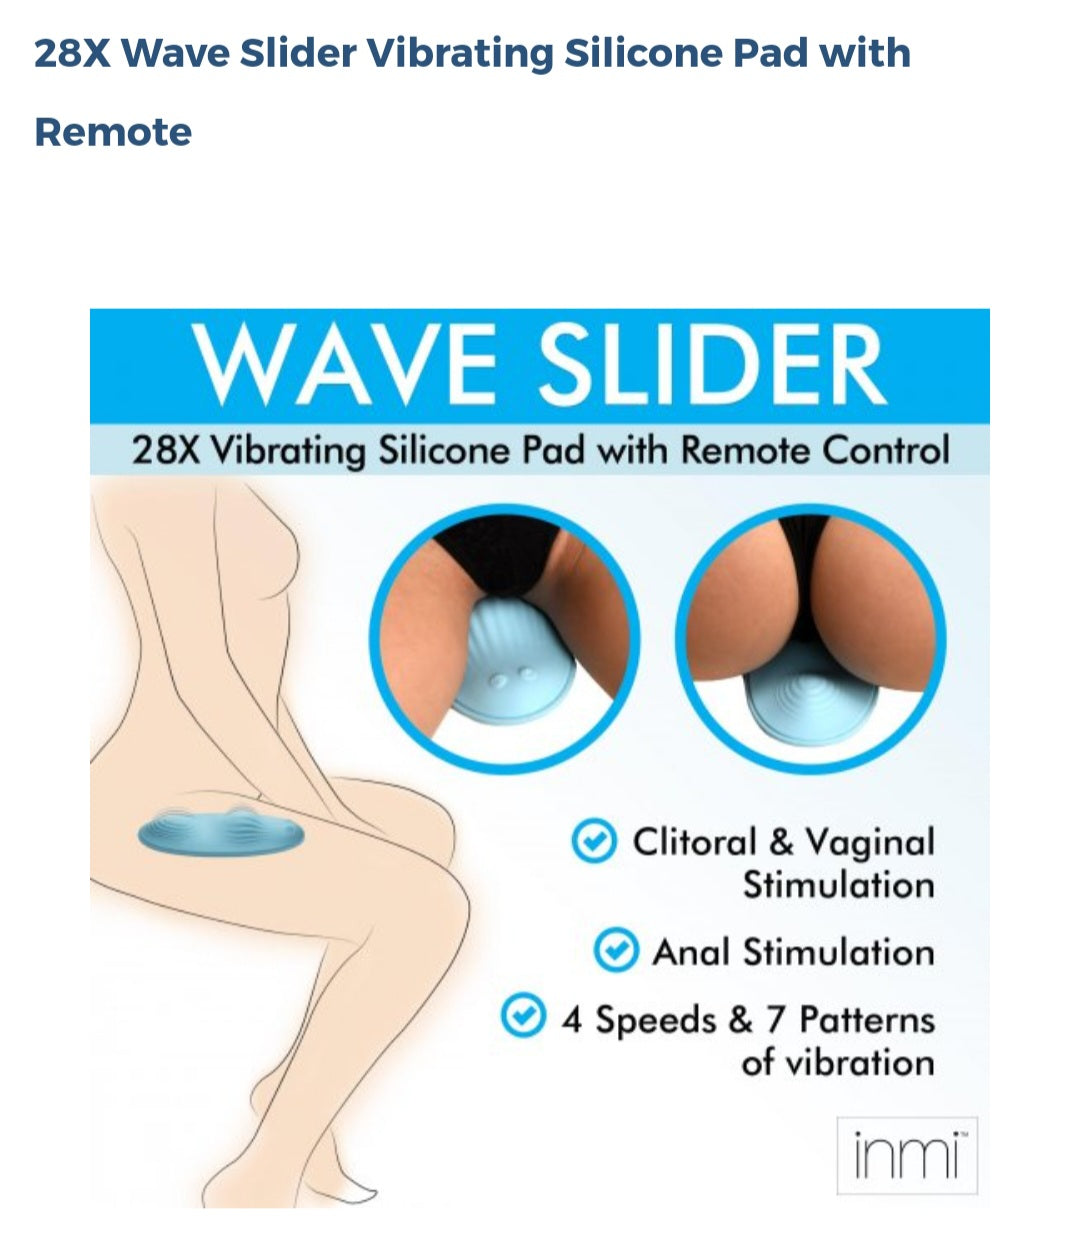 28X Wave Slider Vibrating Silicone Pad With Remote